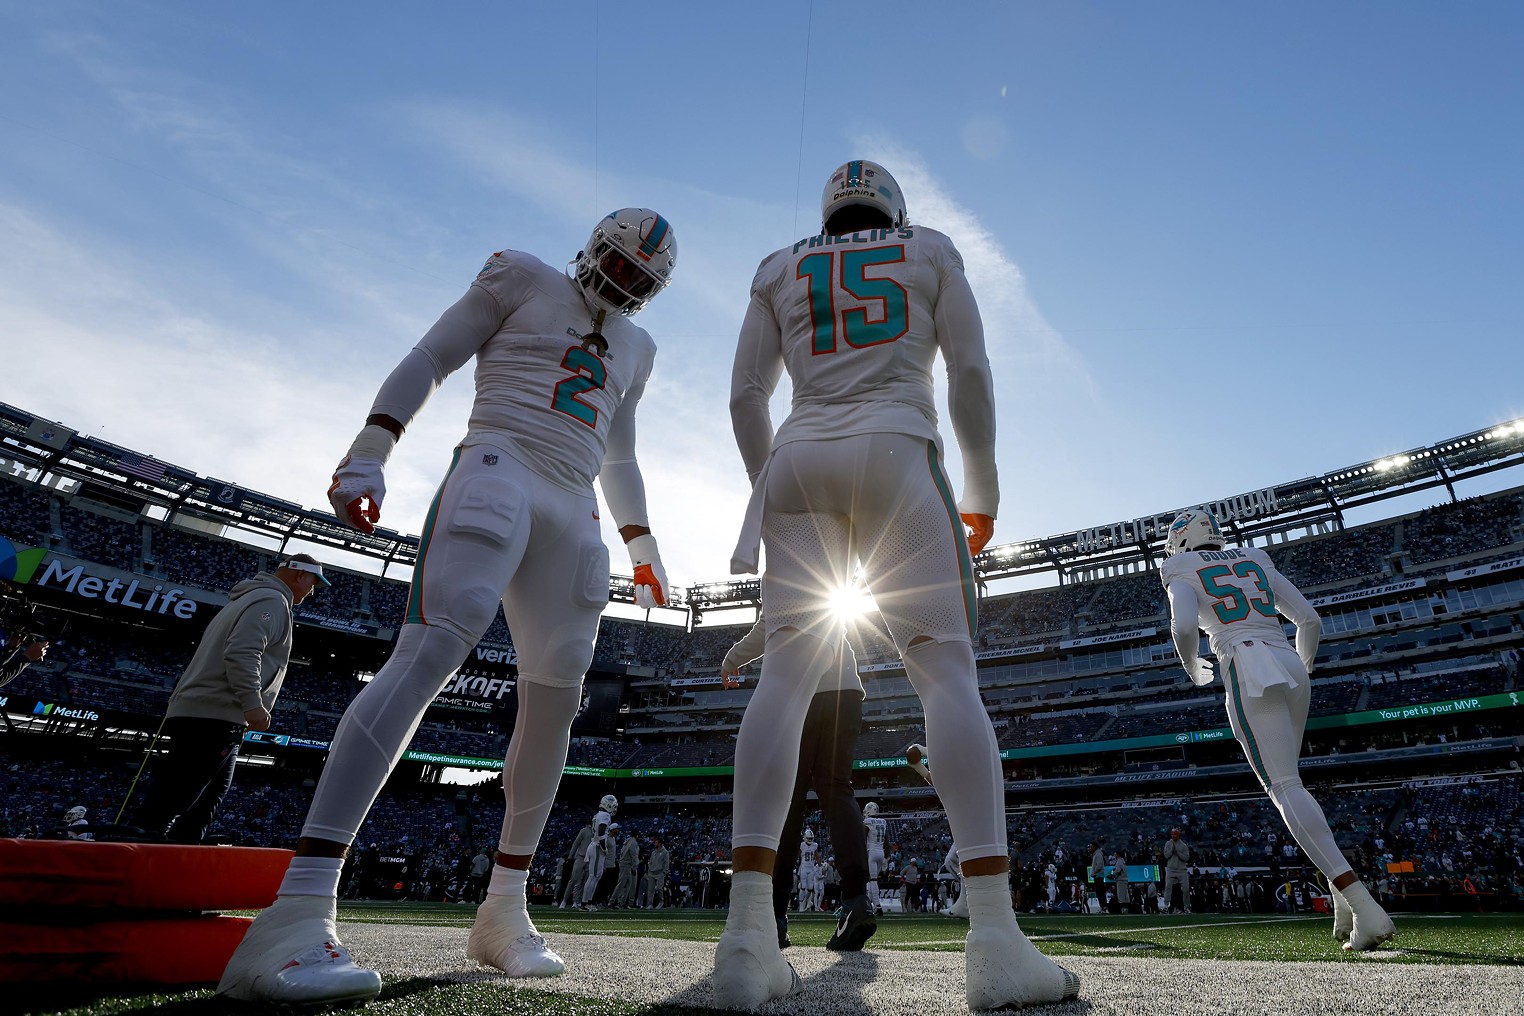 Second Episode of Hard Knocks Featuring Miami Dolphins Premieres on HBO